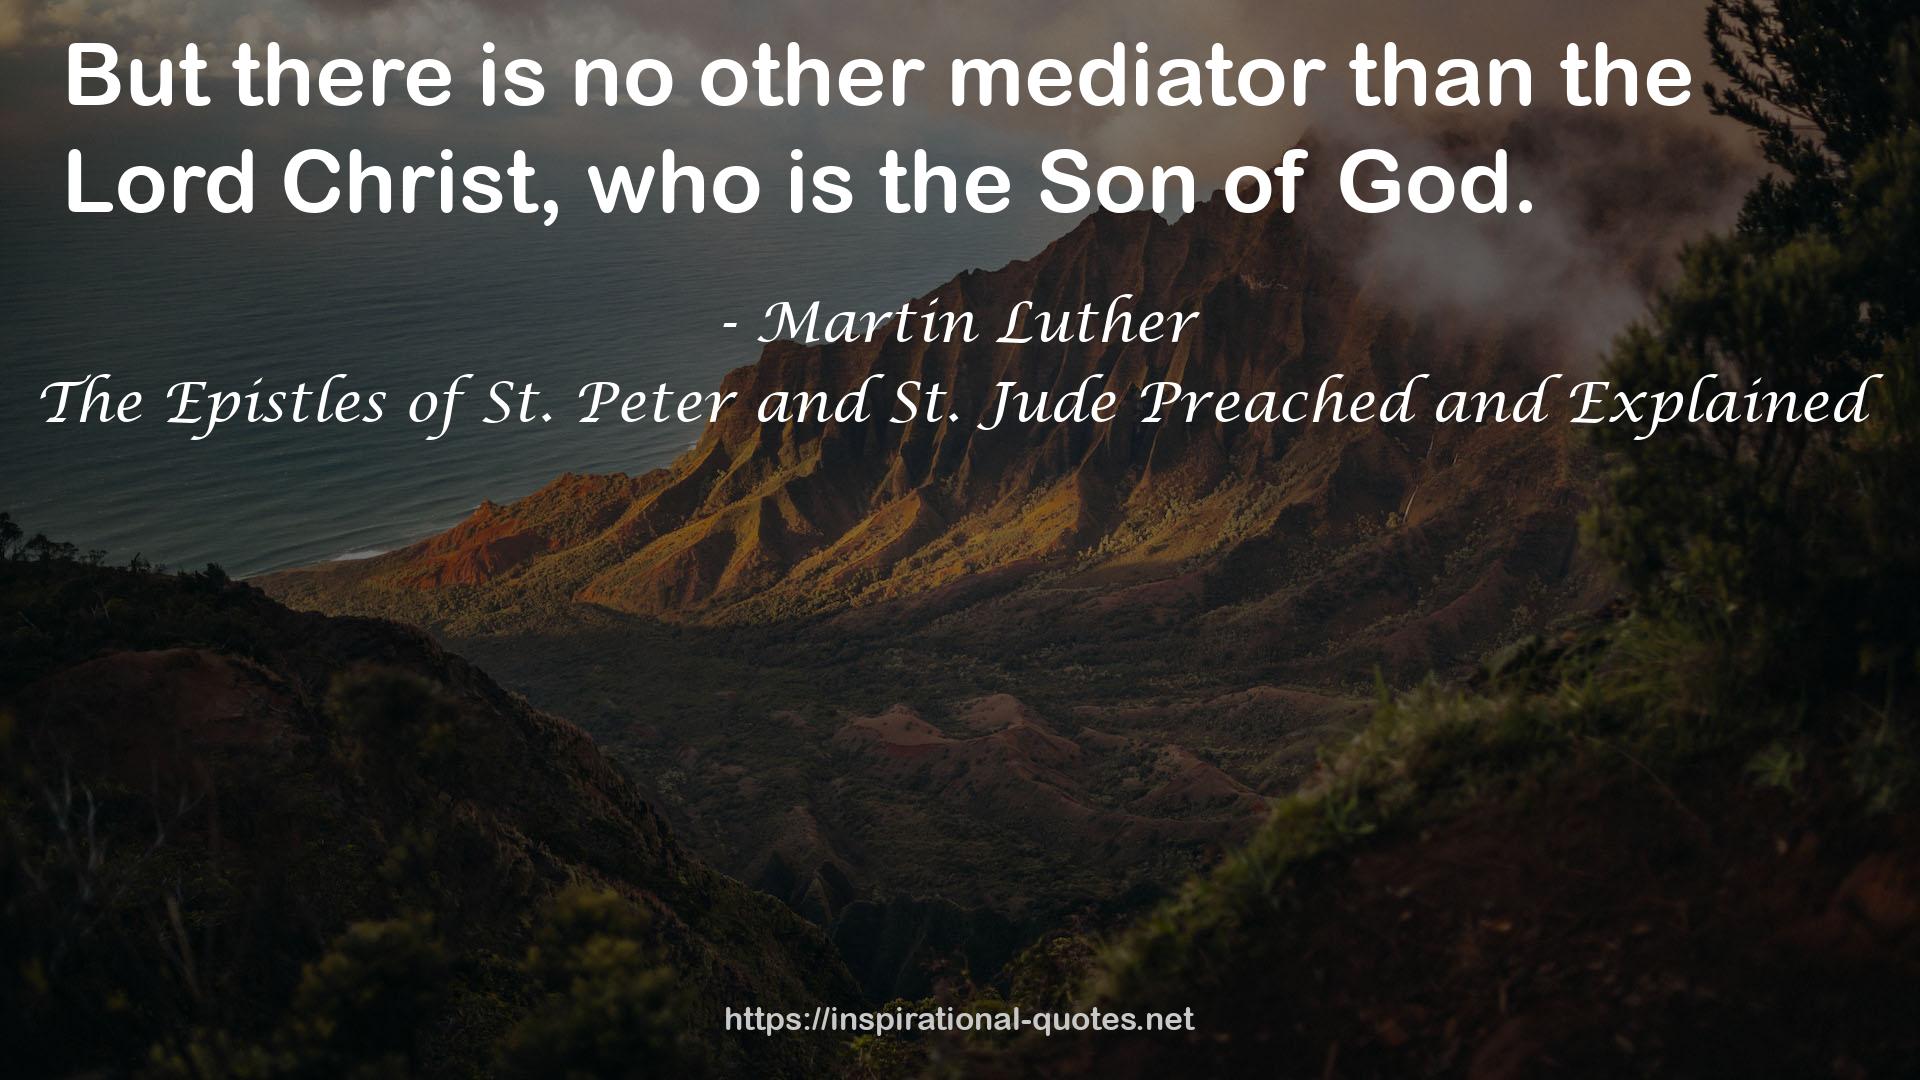 The Epistles of St. Peter and St. Jude Preached and Explained QUOTES